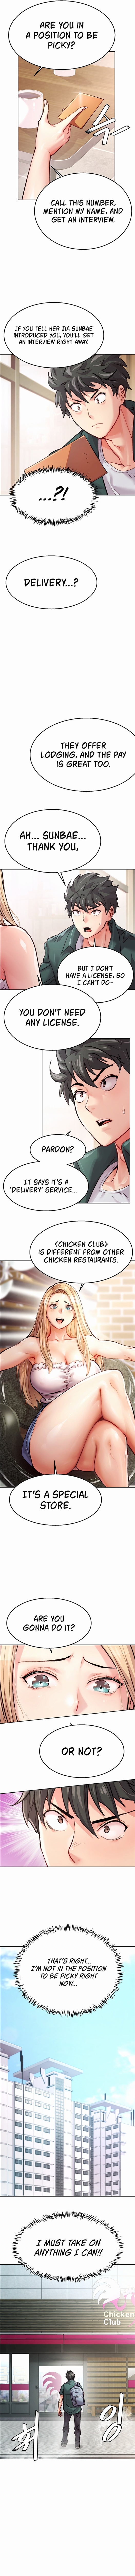 Chicken Club - Chapter 1 Page 4